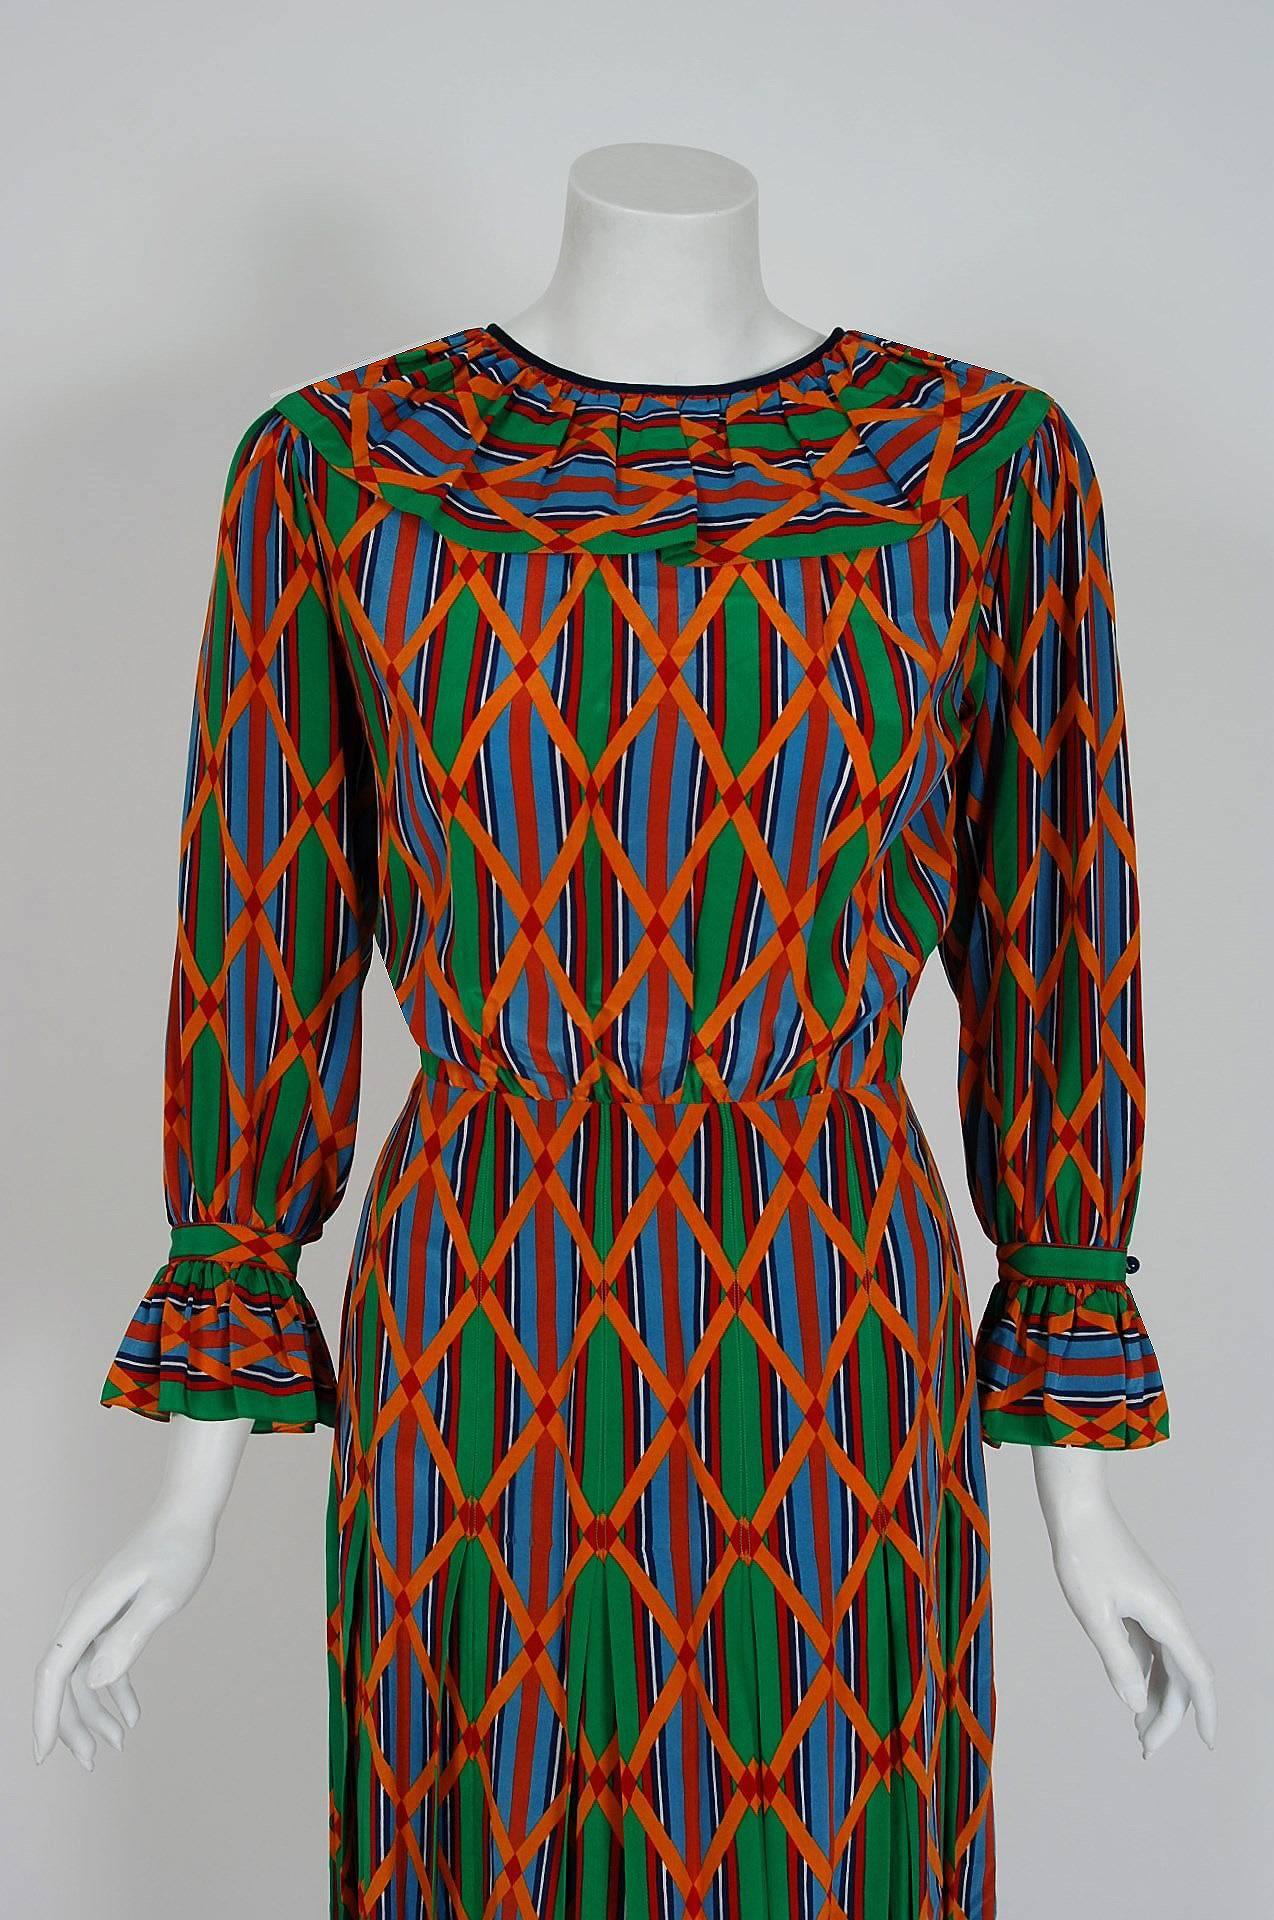 Breathtaking Yves Saint Laurent colorful Navajo southwestern print silk dress from the infamous Rive Gauche collection during the late 1970's. Pieces from this decade are very rare and are true examples of fashion history. The bodice has a beautiful